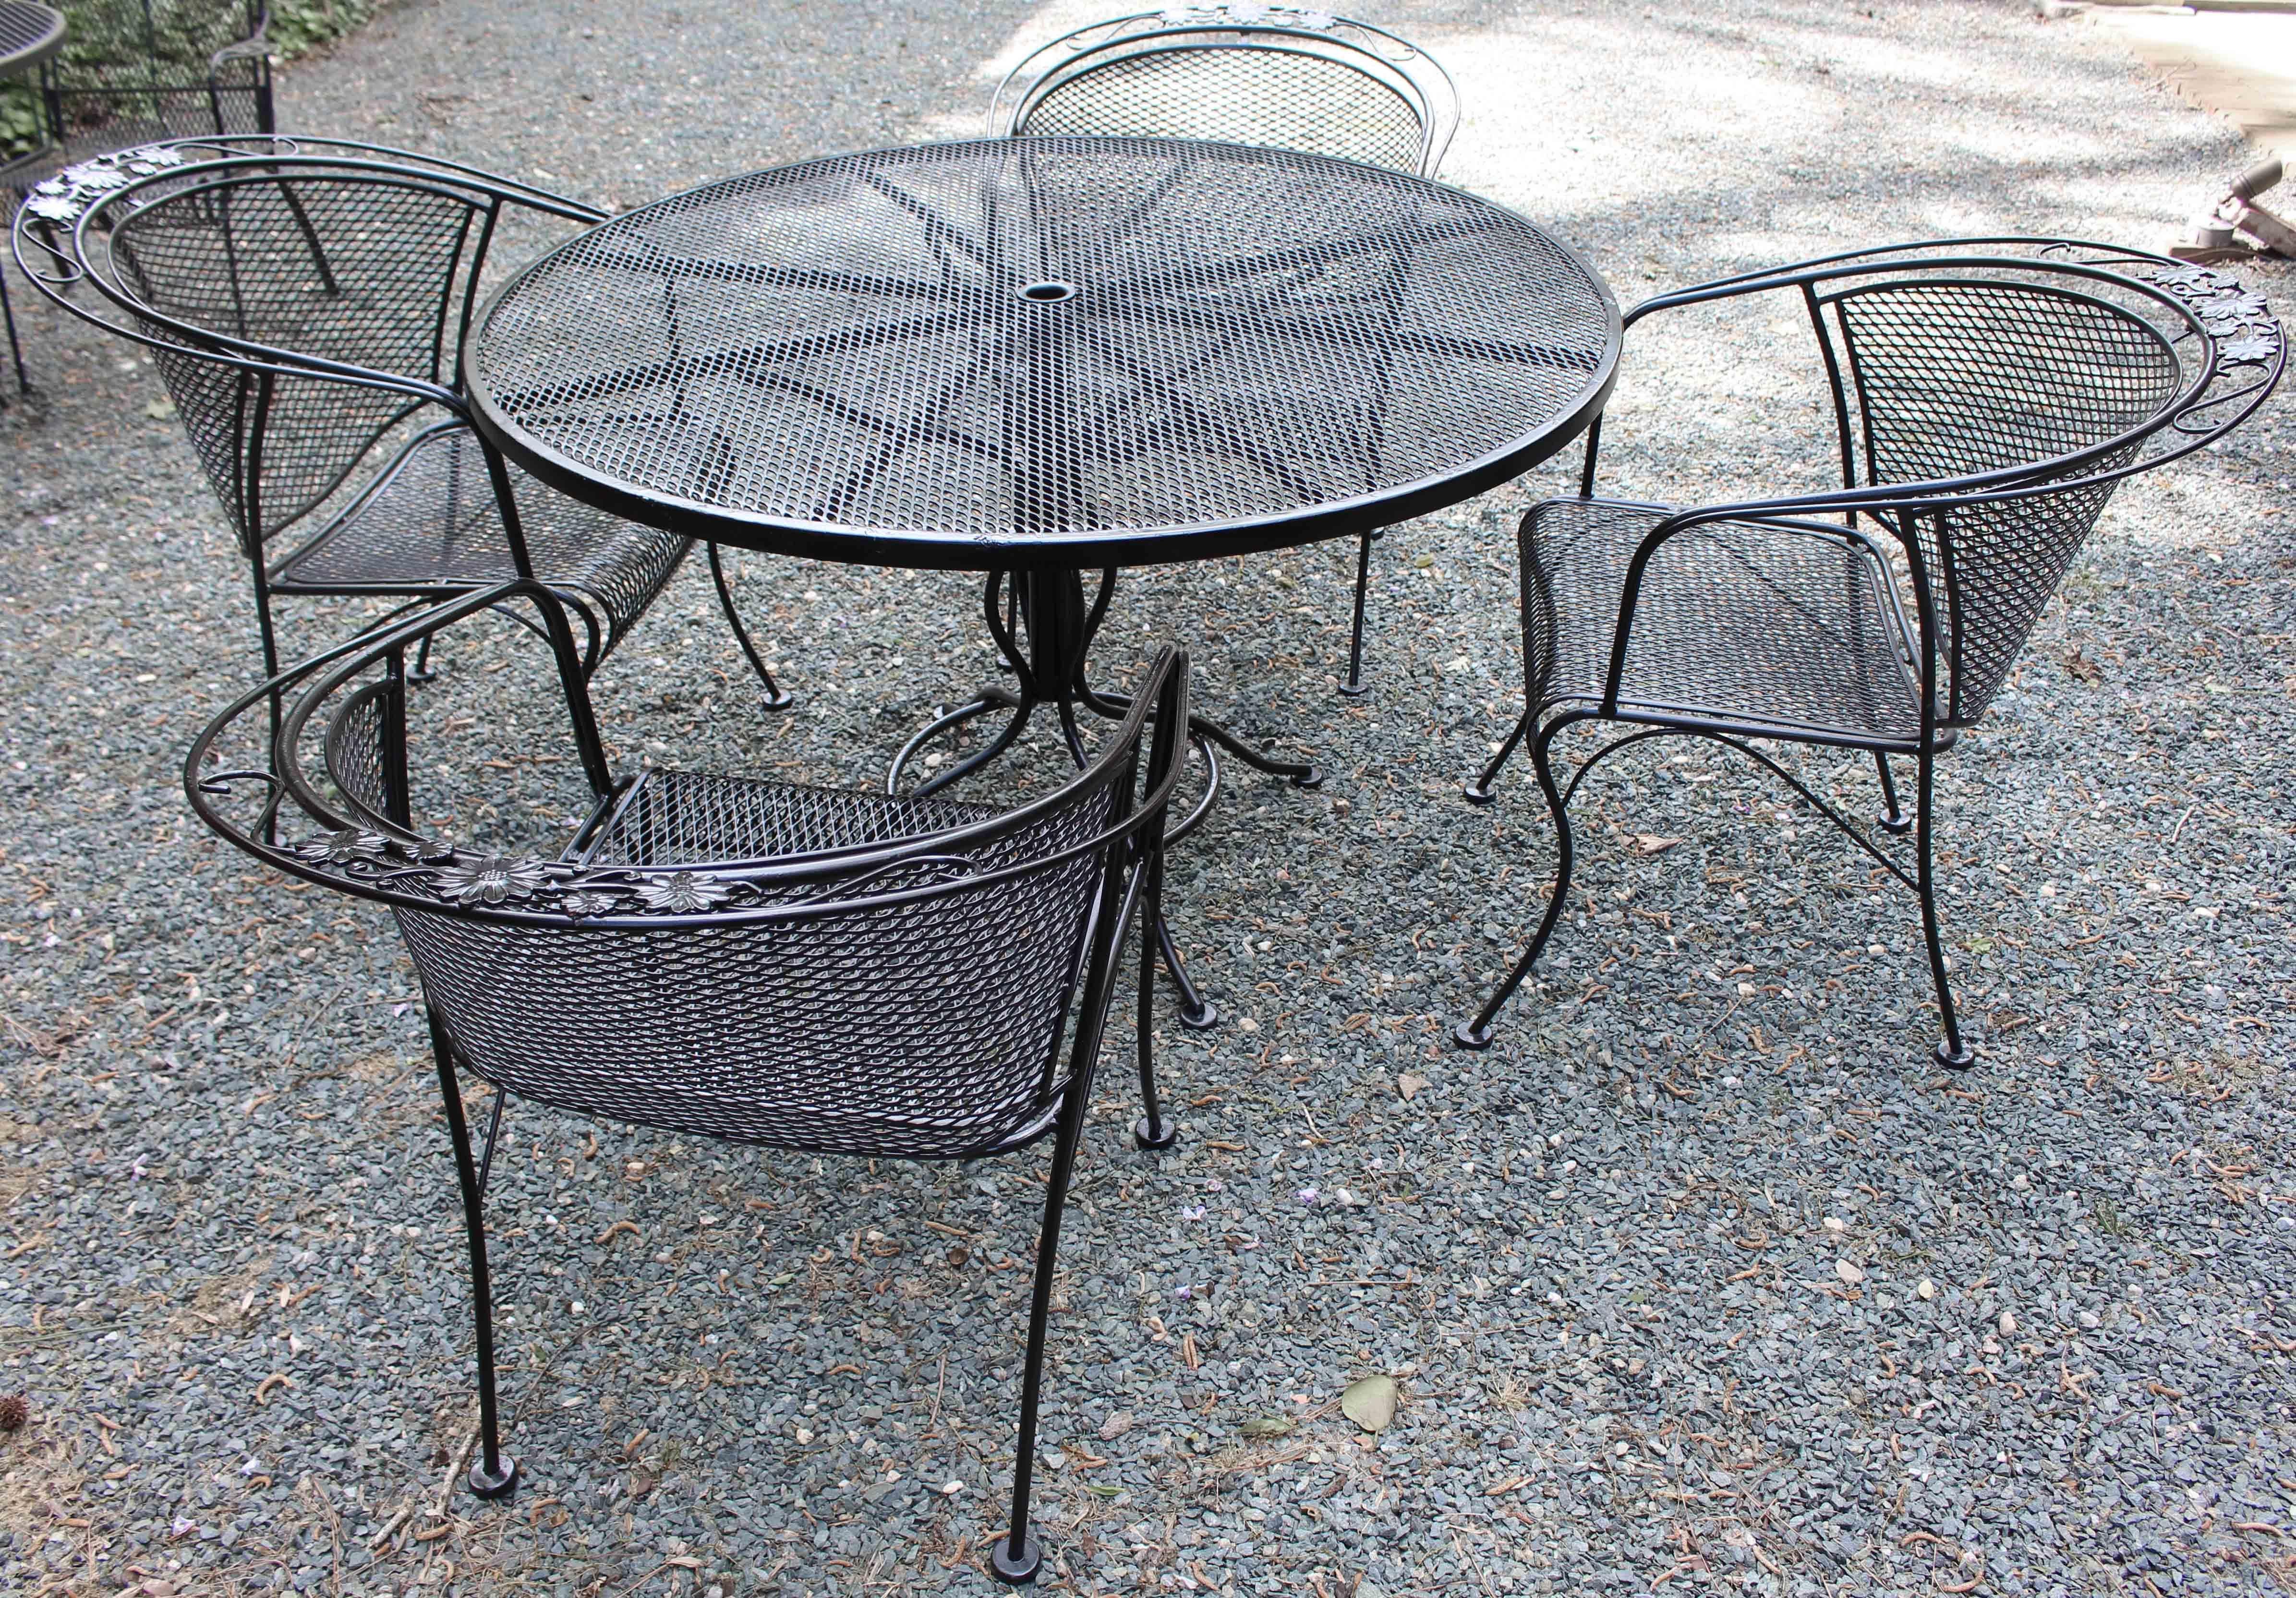 Wrought iron table & 4 chairs by Russell Woodard, circa 1980s. The 